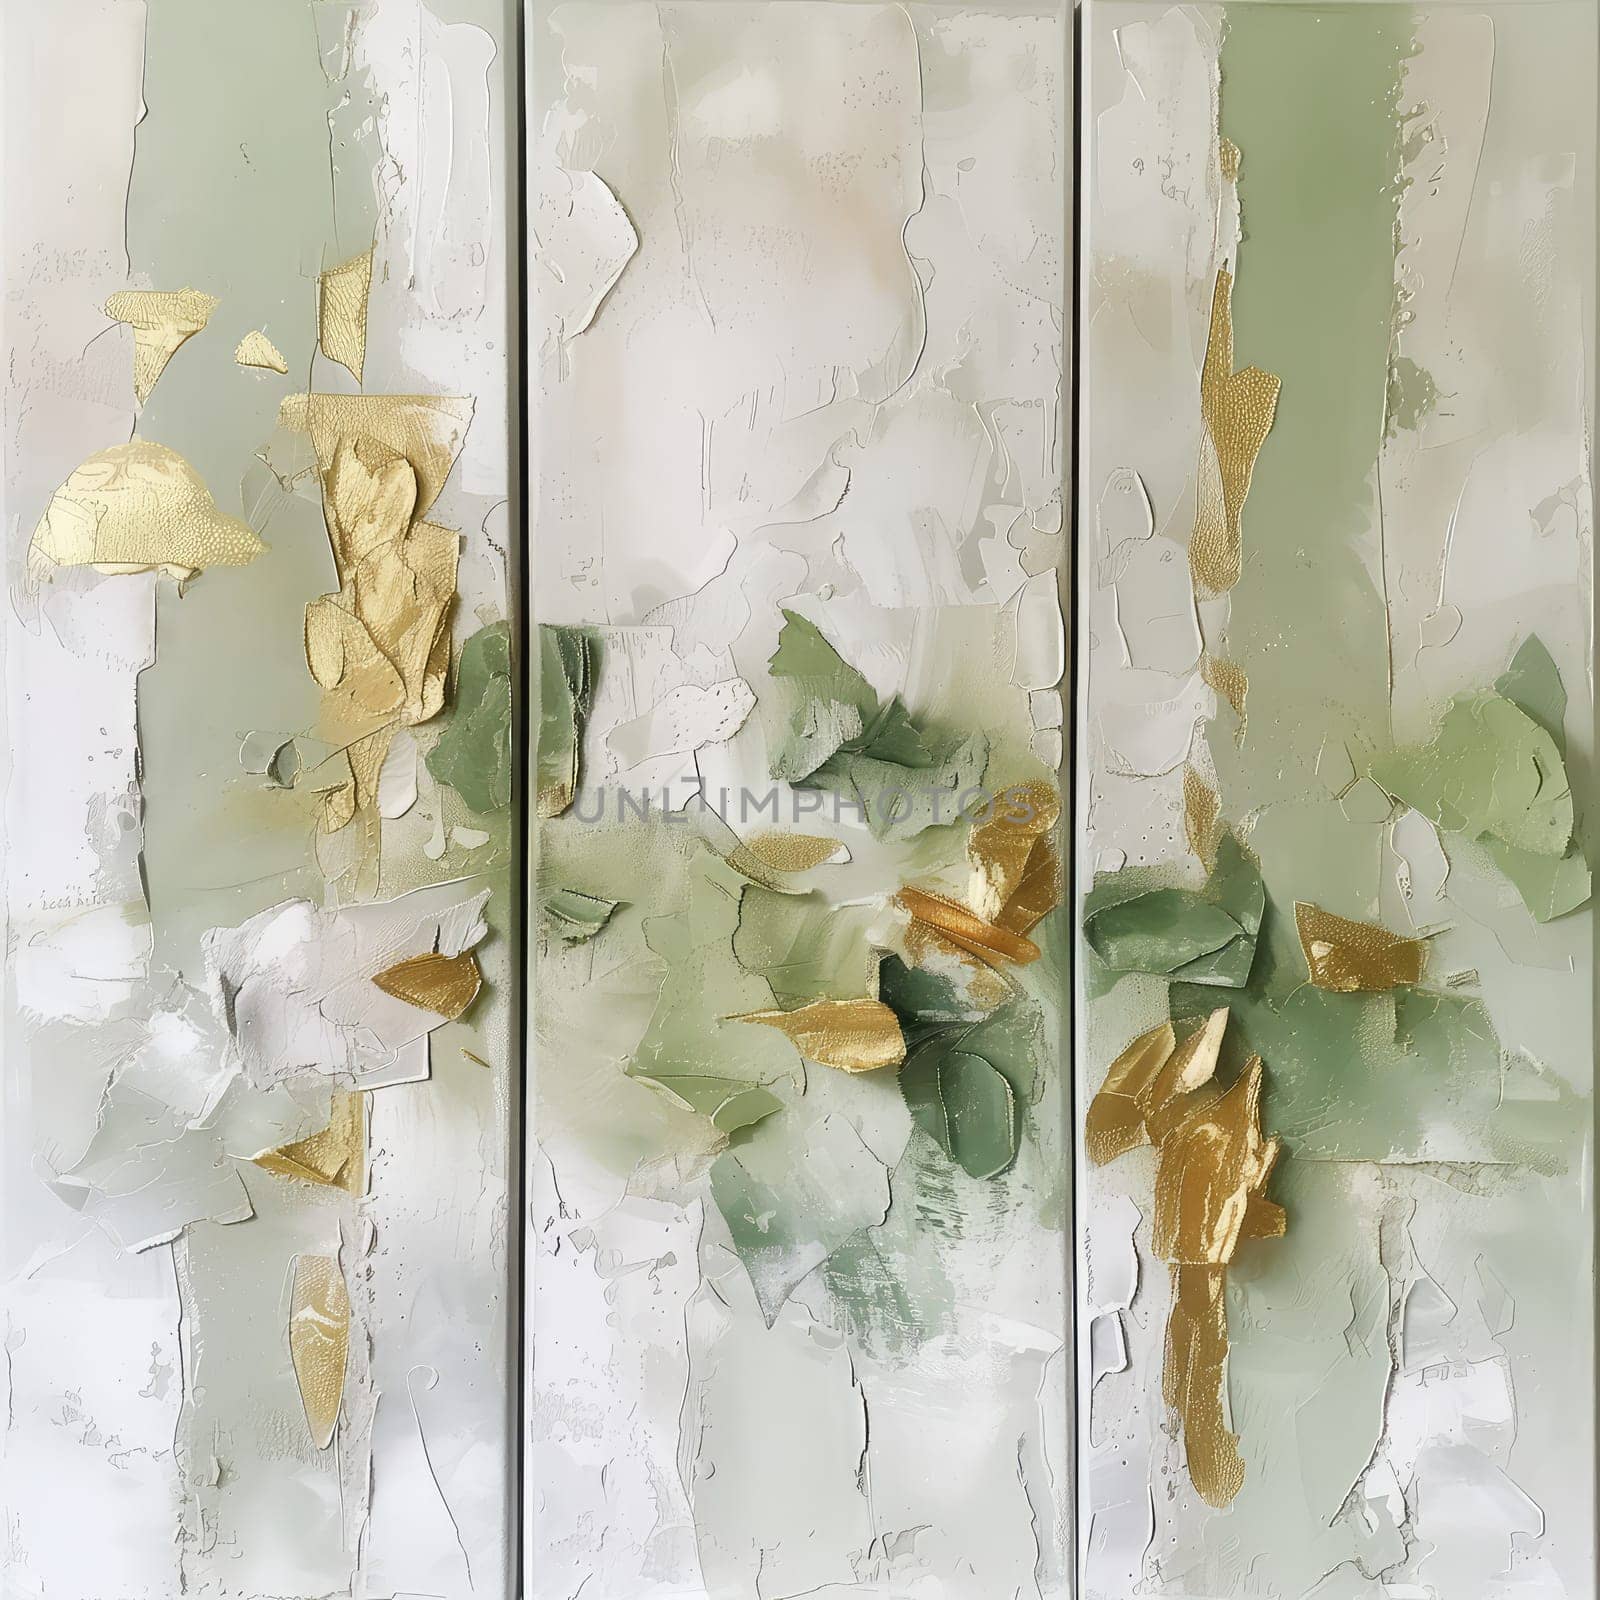 Abstract Triptych Canvas in Pale Green and Gold, Ideal for Modern Home Decor.